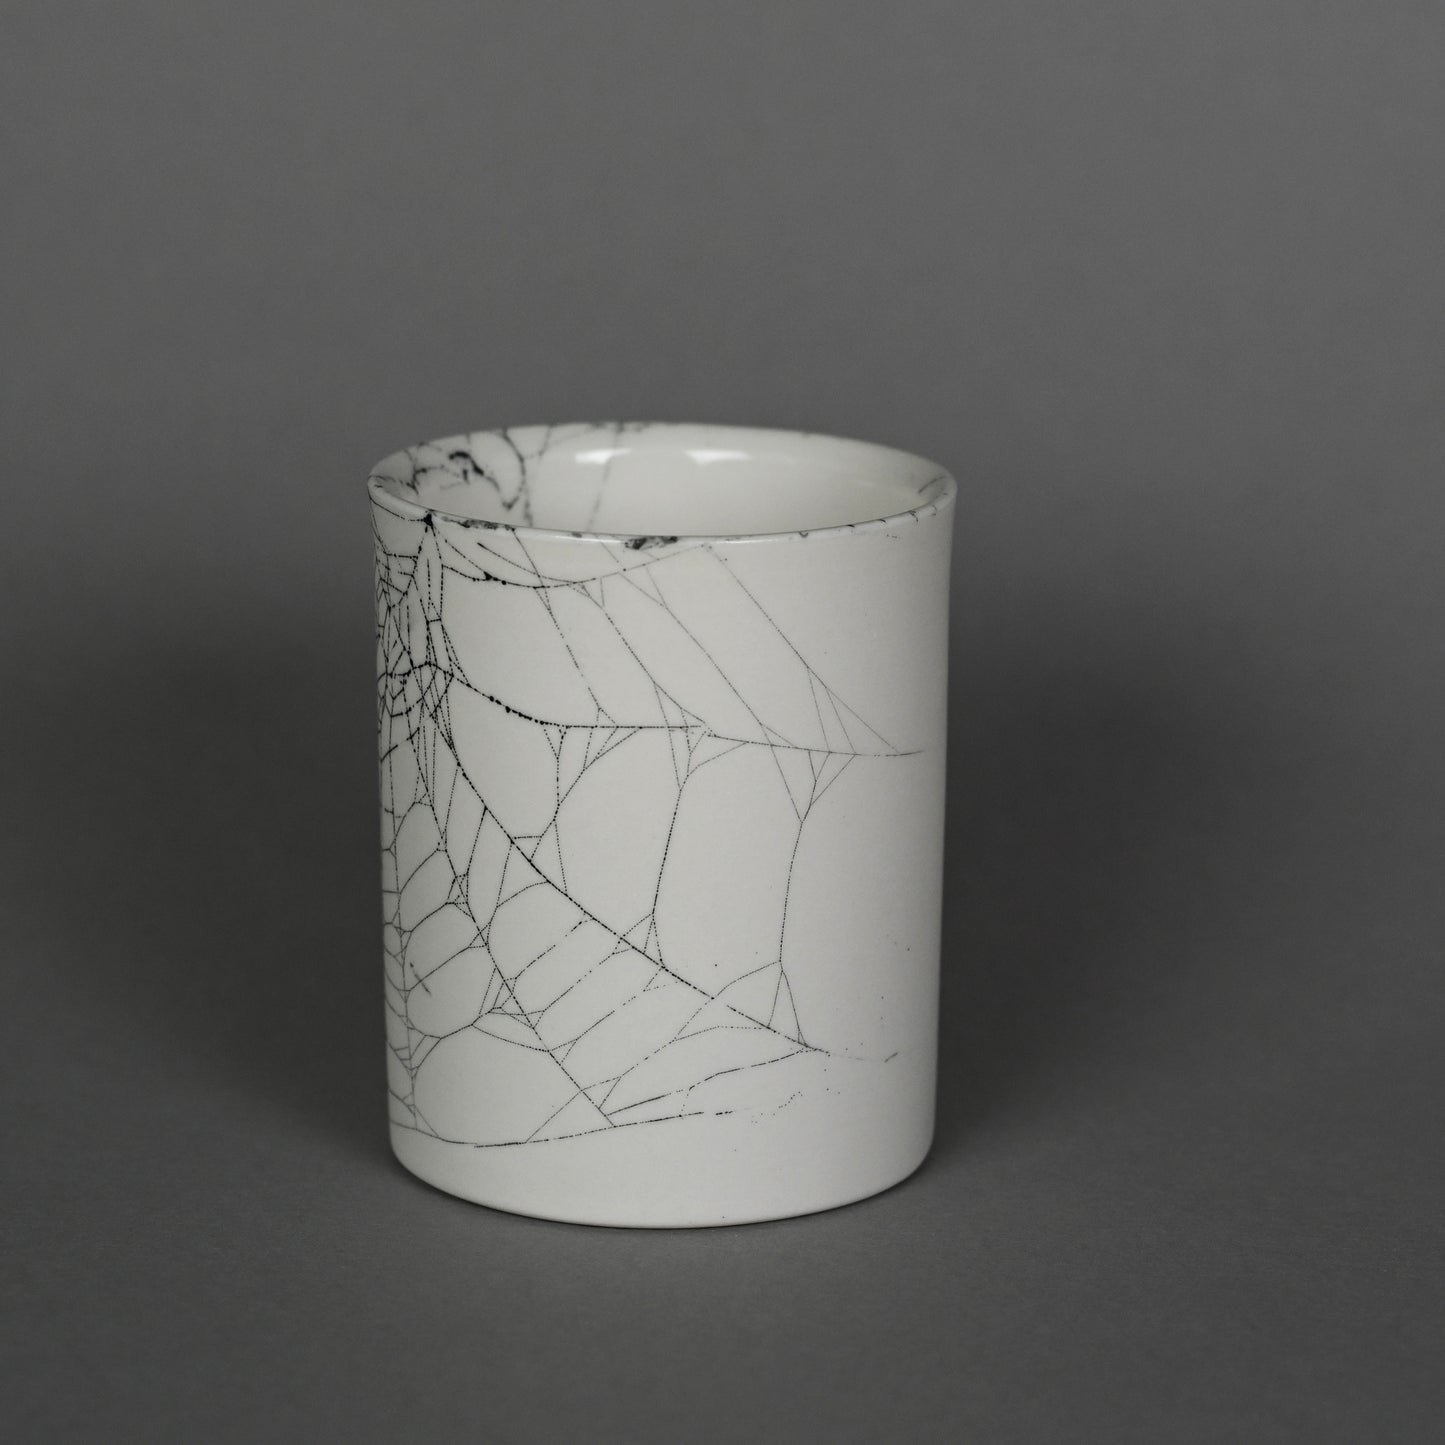 Web on Clay (214), Collected September 24, 2022